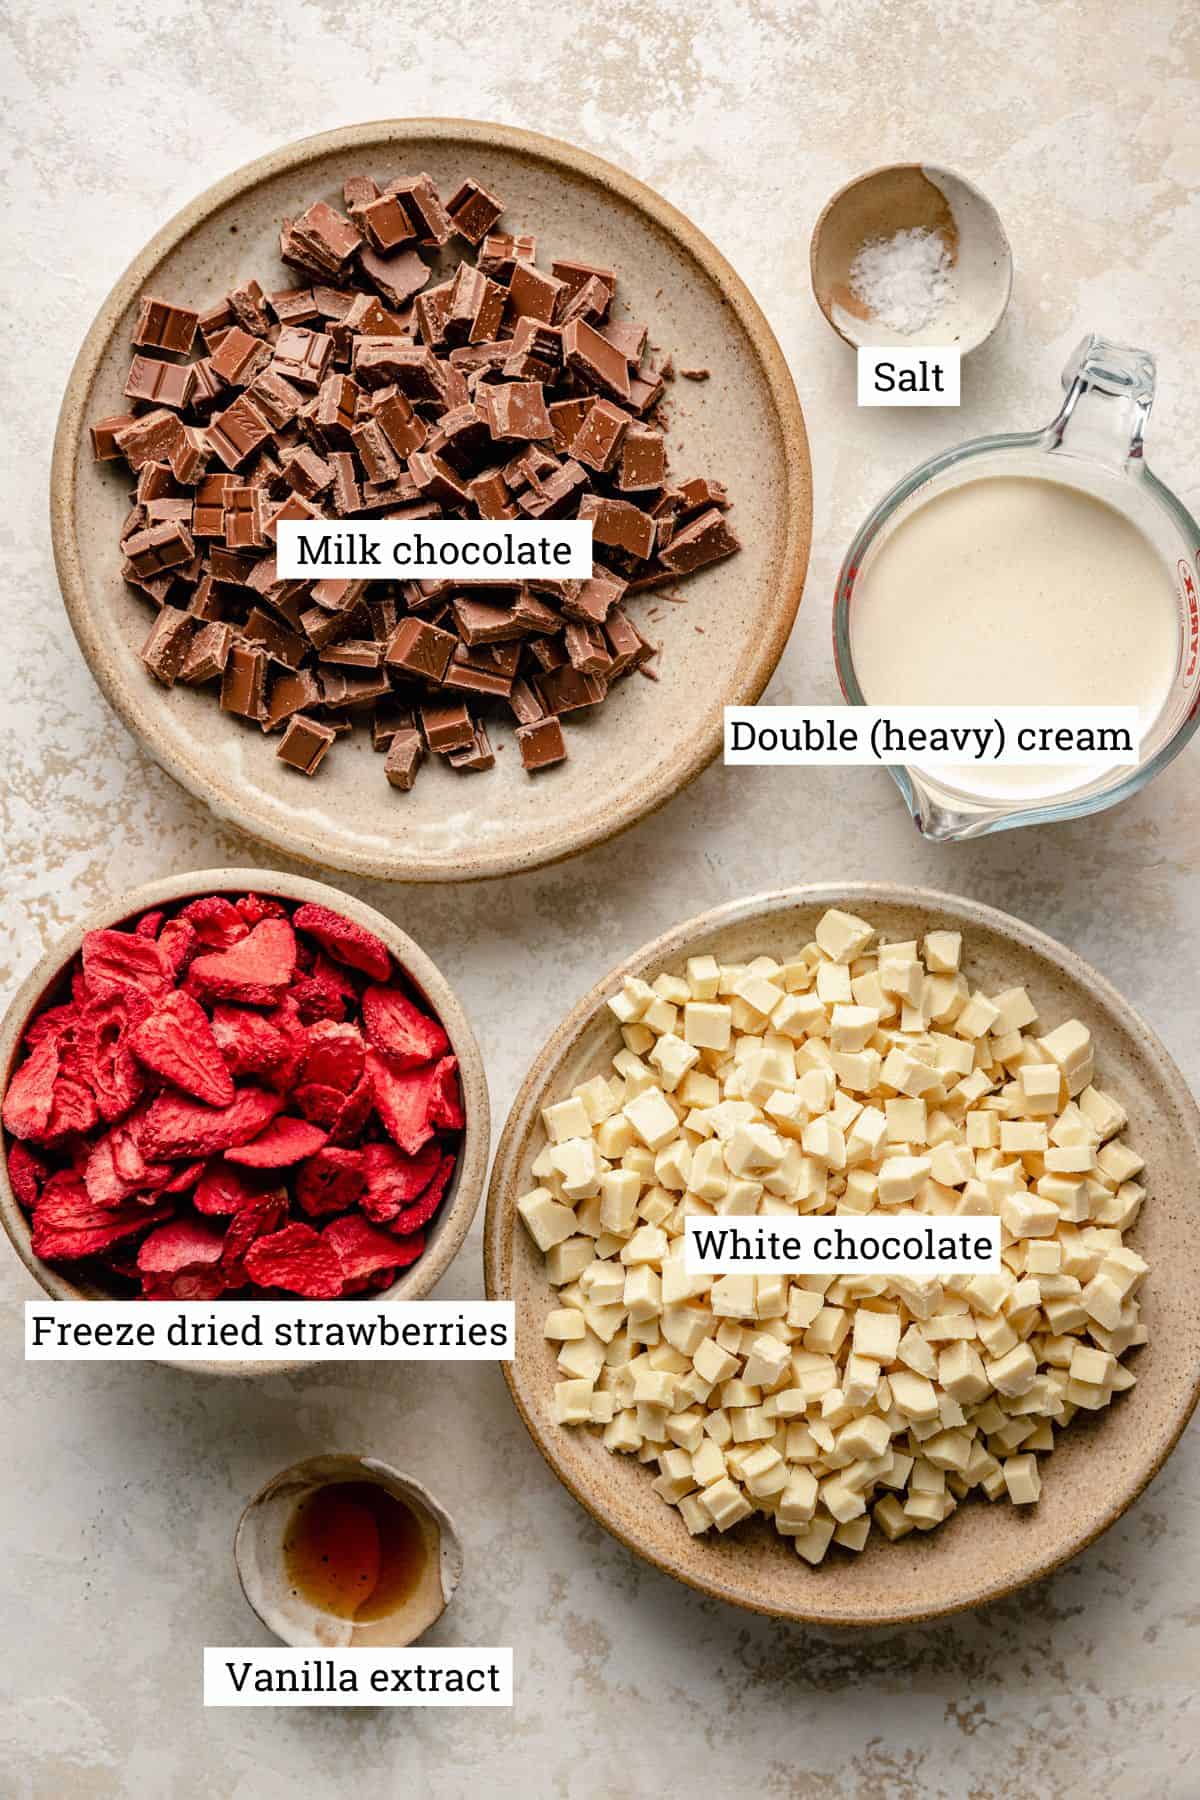 Ingredients in bowls on a work surface including chocolate, heavy cream and freeze dried strawberries.